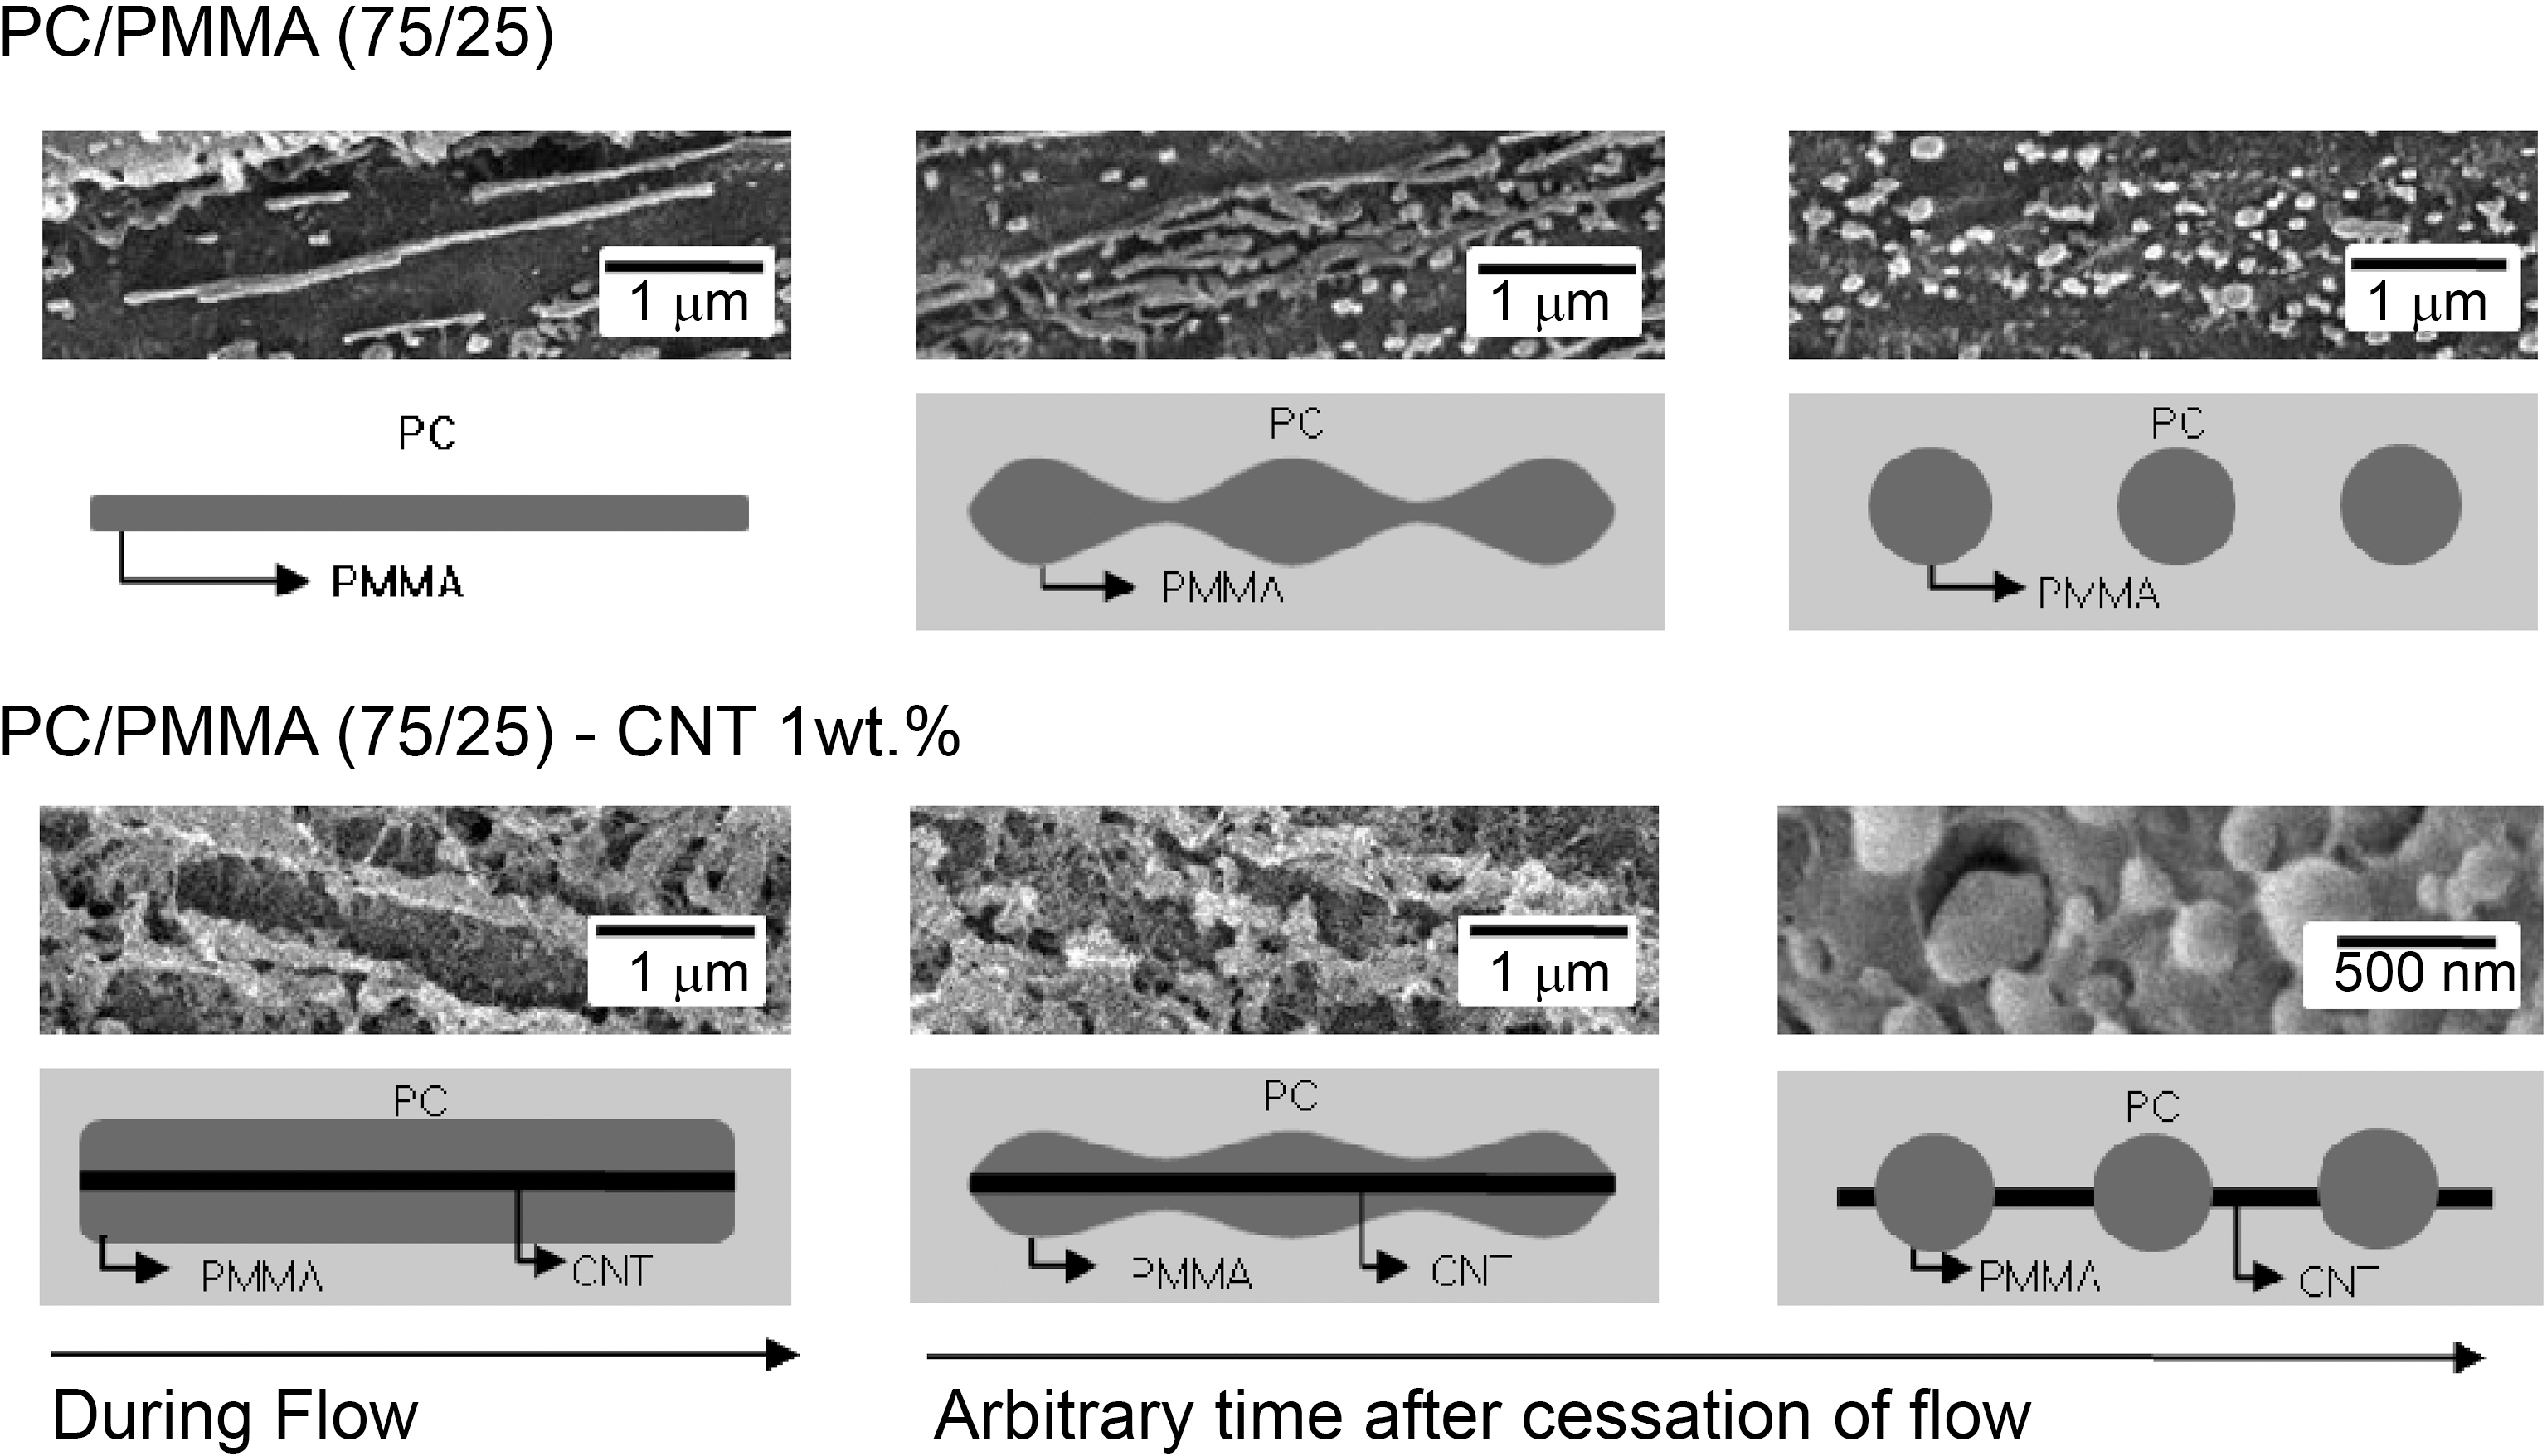 Elongation and retraction of PMMA-rich phase with or without MWCNT dispersions.